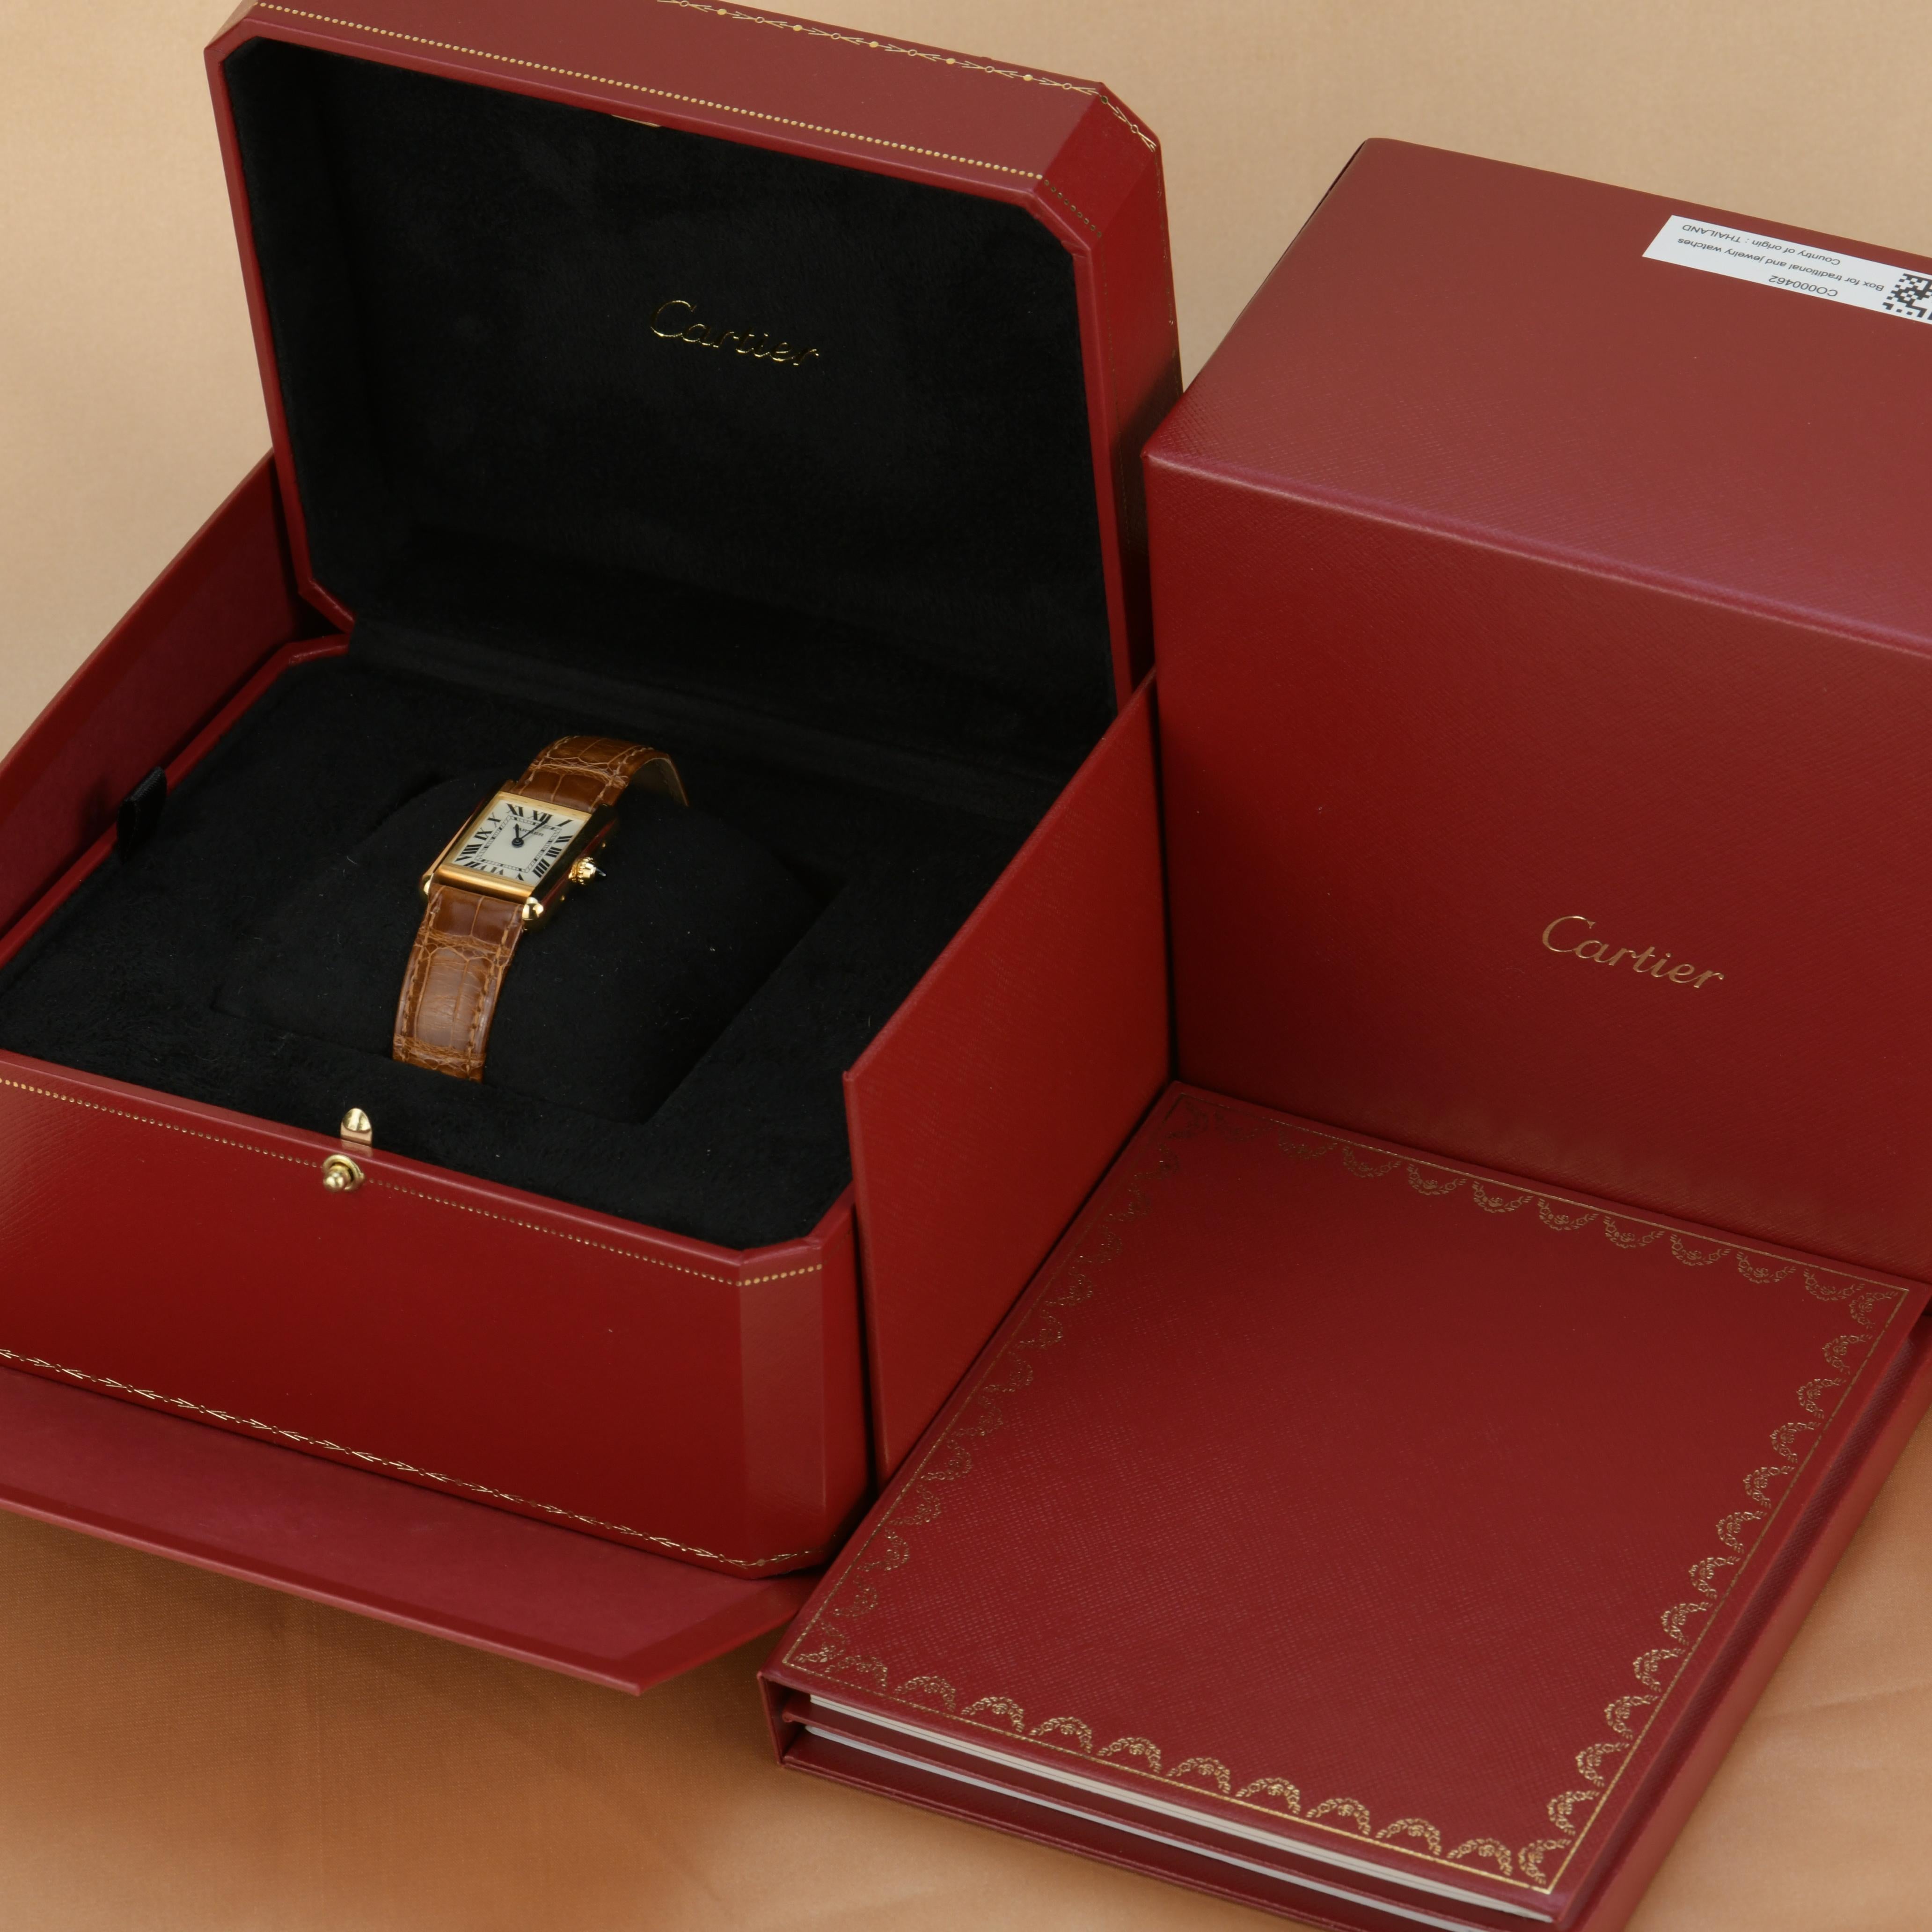 Cabochon Brand New Cartier Tank Louis Small Model 18k Yellow Gold Watch W1529856